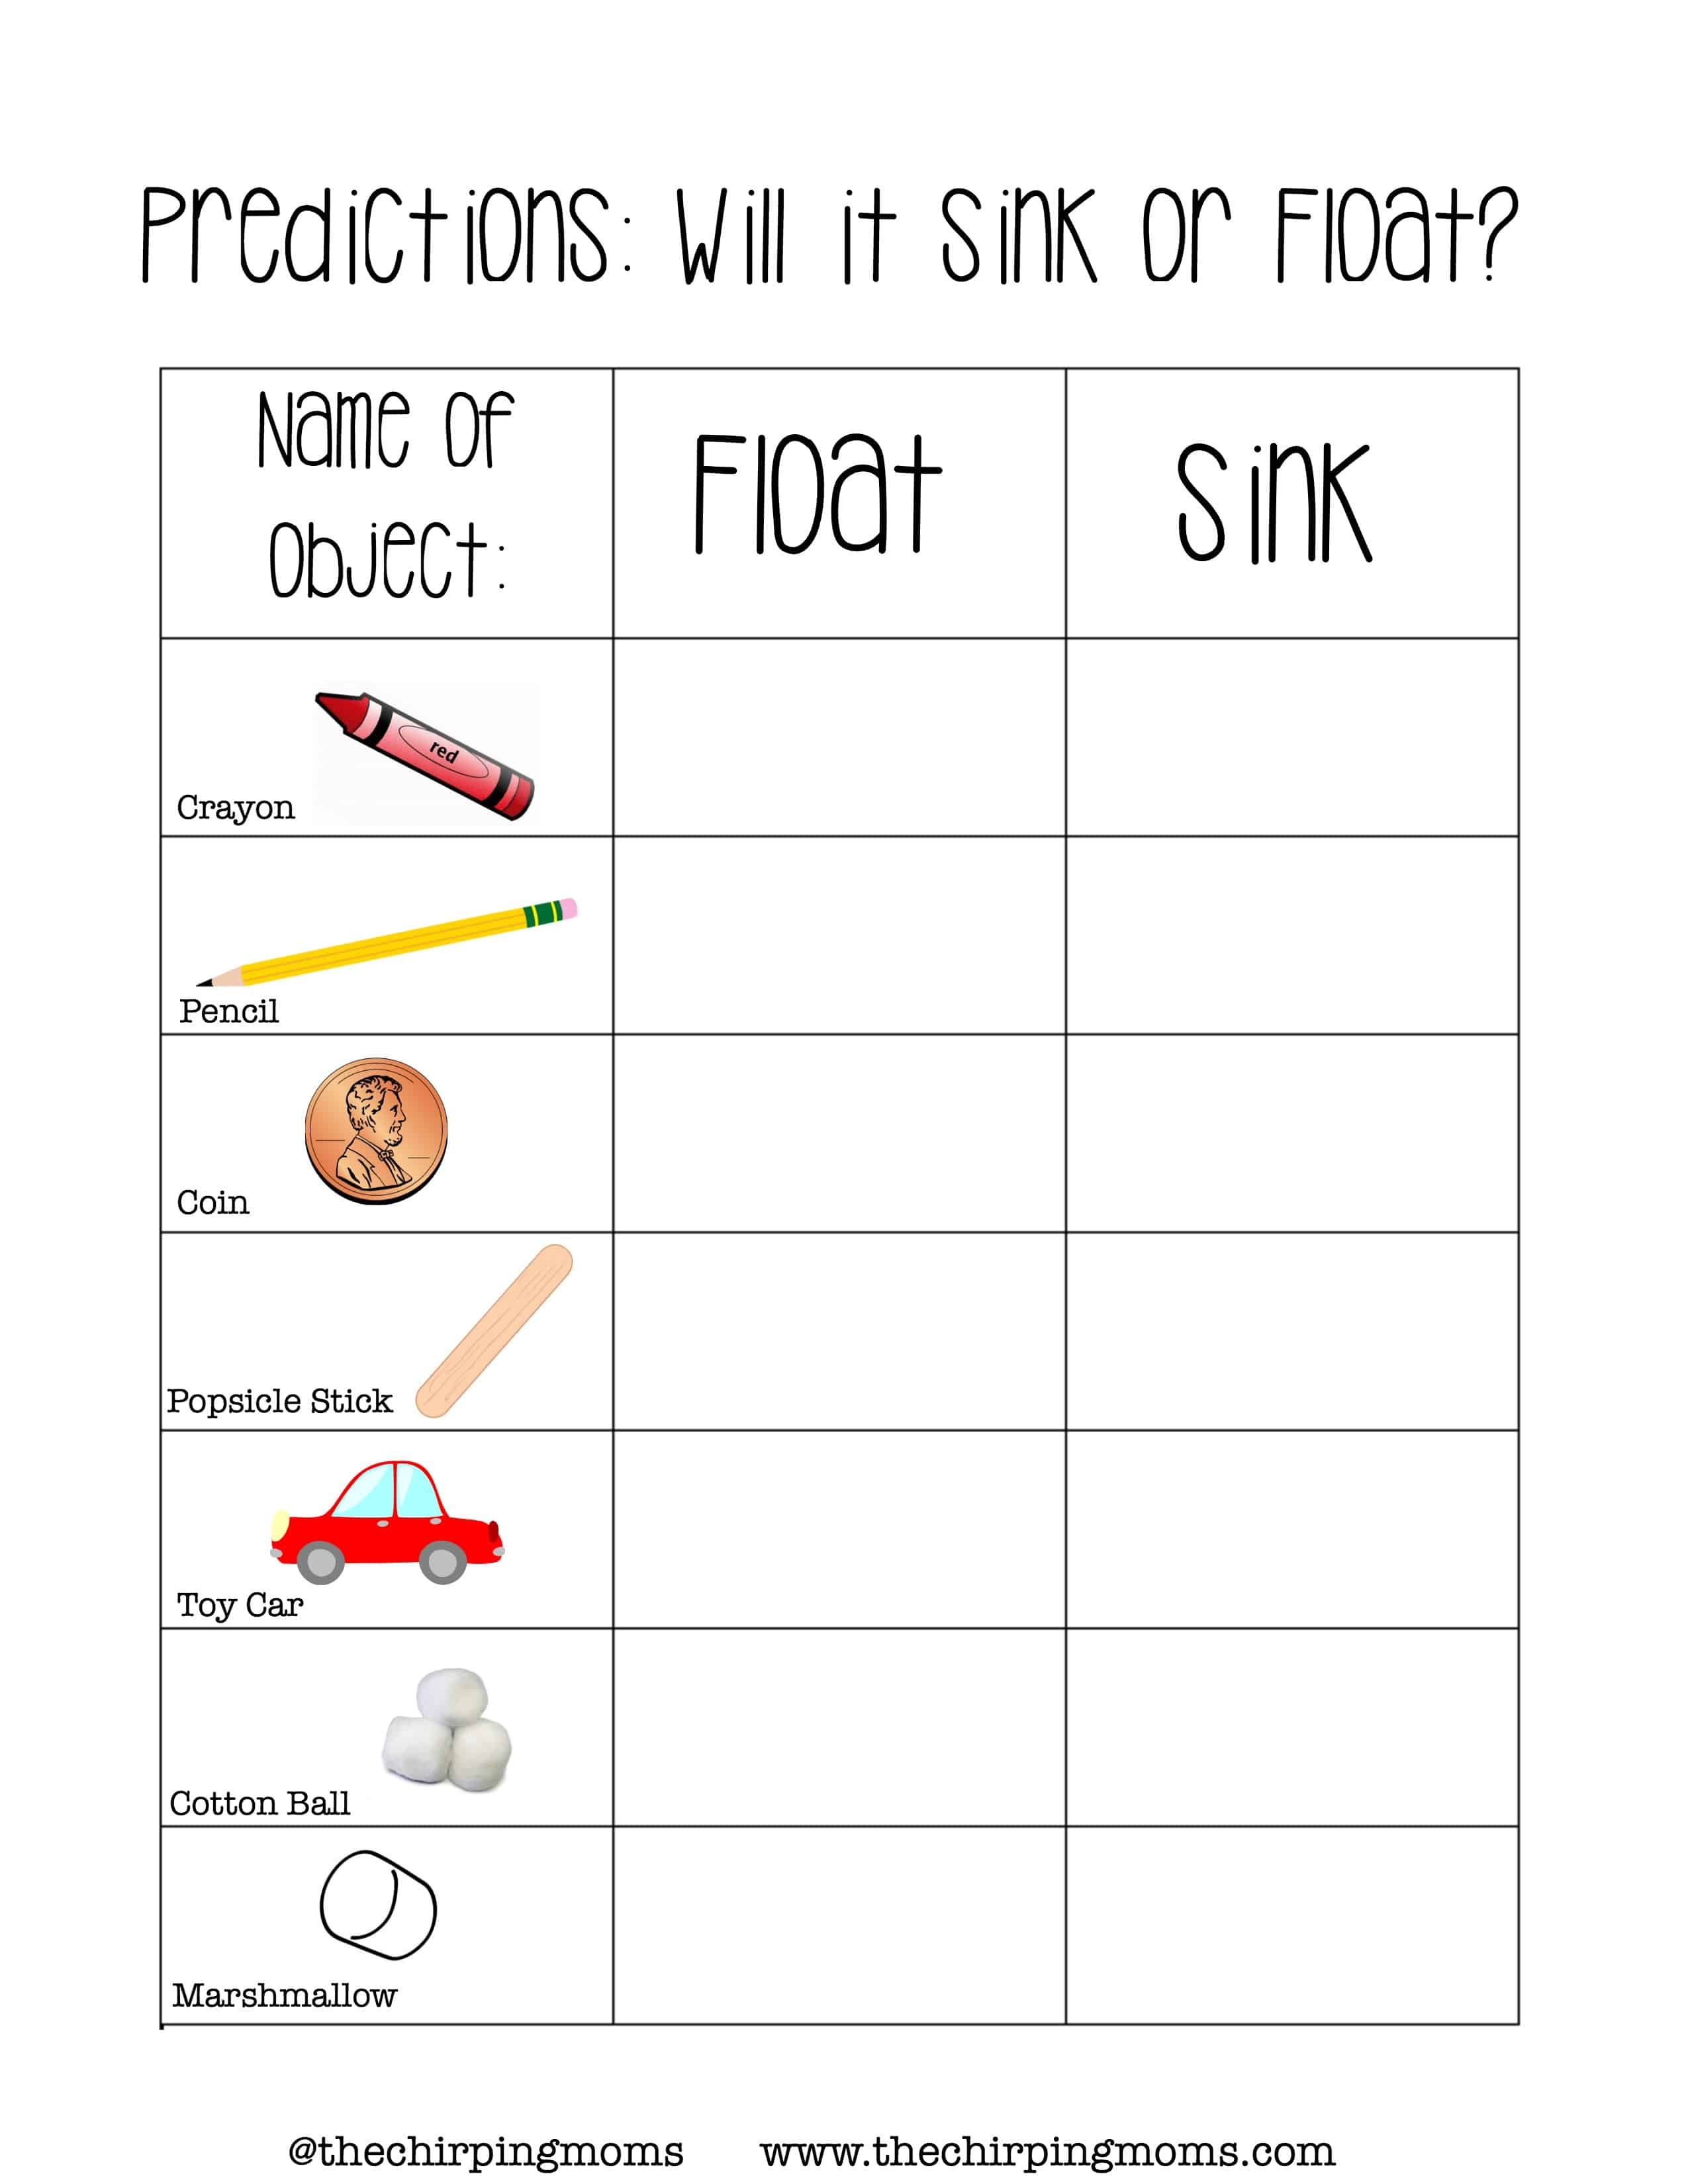 Simple Science: Will it Sink or Float? - The Chirping Moms Within Sink Or Float Worksheet